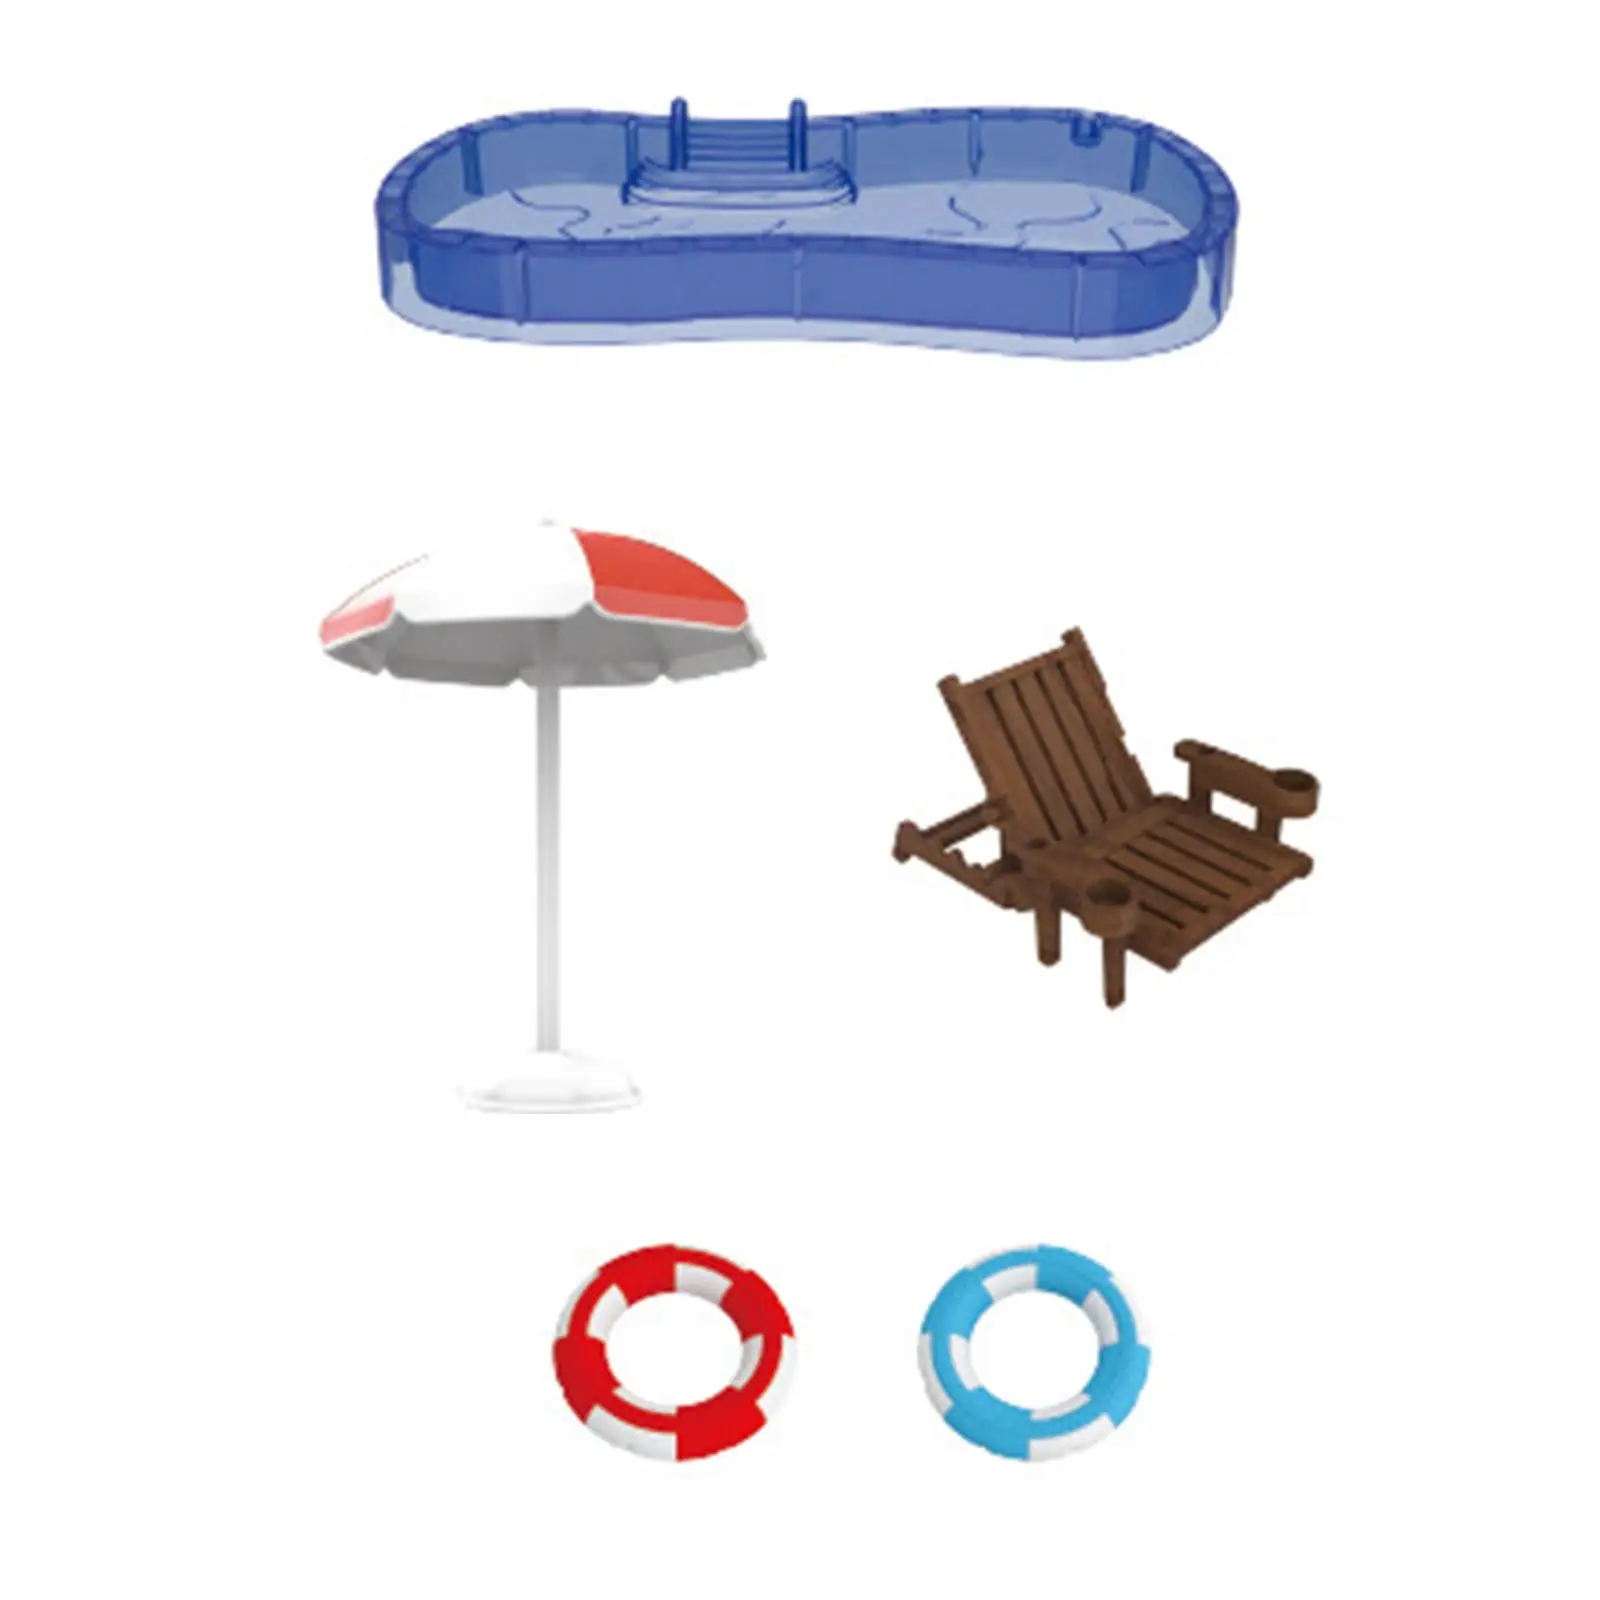 

Dolls House Swimming Pool Set including Swimming Pool, Parasol, Chair, and Floats Micro Landscape Miniature Simulation Furniture